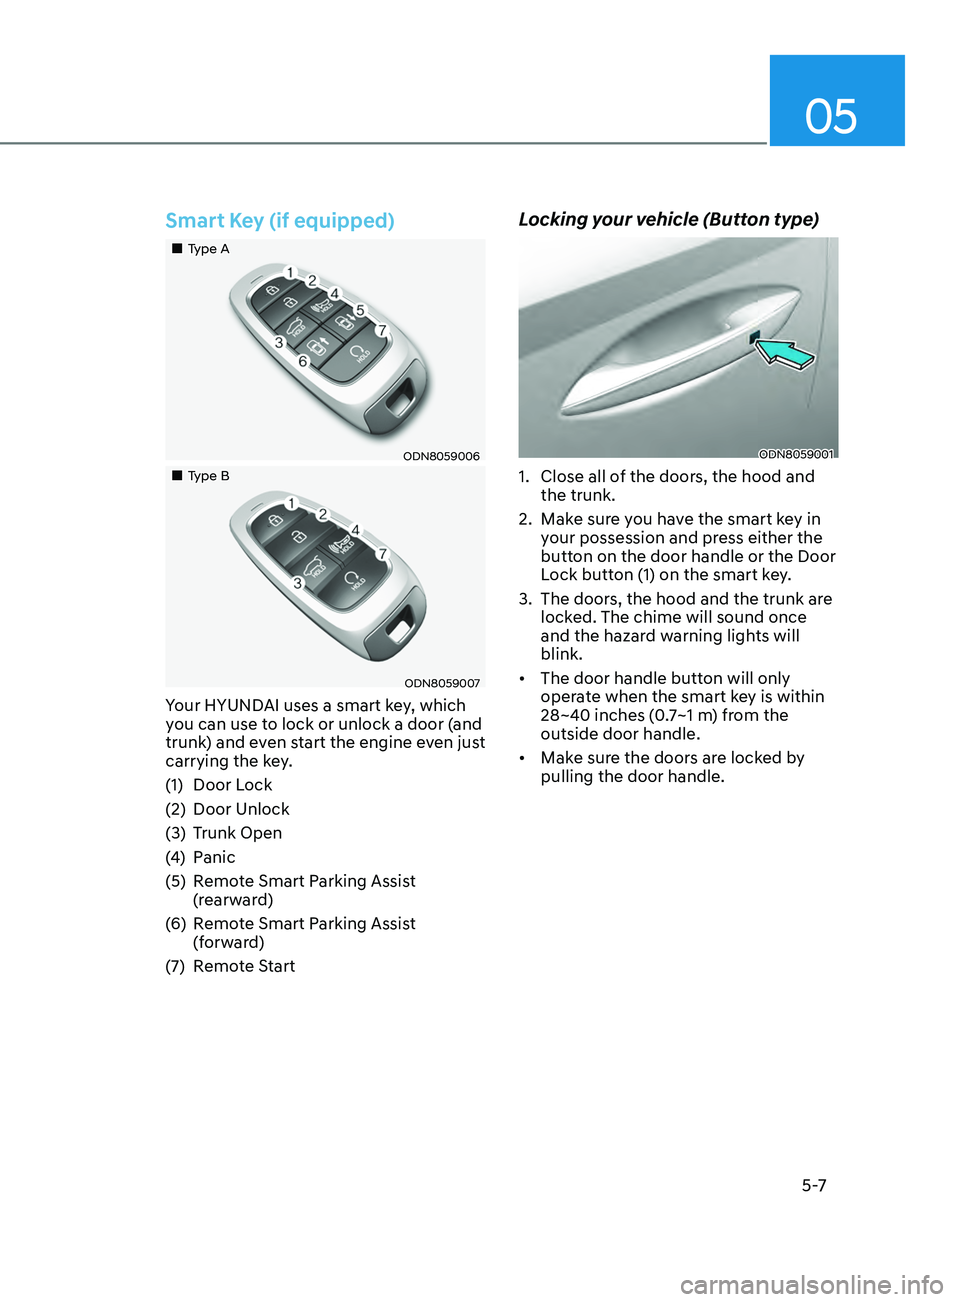 HYUNDAI SONATA 2022  Owners Manual 05
5 -7
Smart Key (if equipped)
„„Type A
ODN8059006
„„Type B
ODN8059007
Your HYUNDAI uses a smart key, which 
you can use to lock or unlock a door (and 
trunk) and even start the e